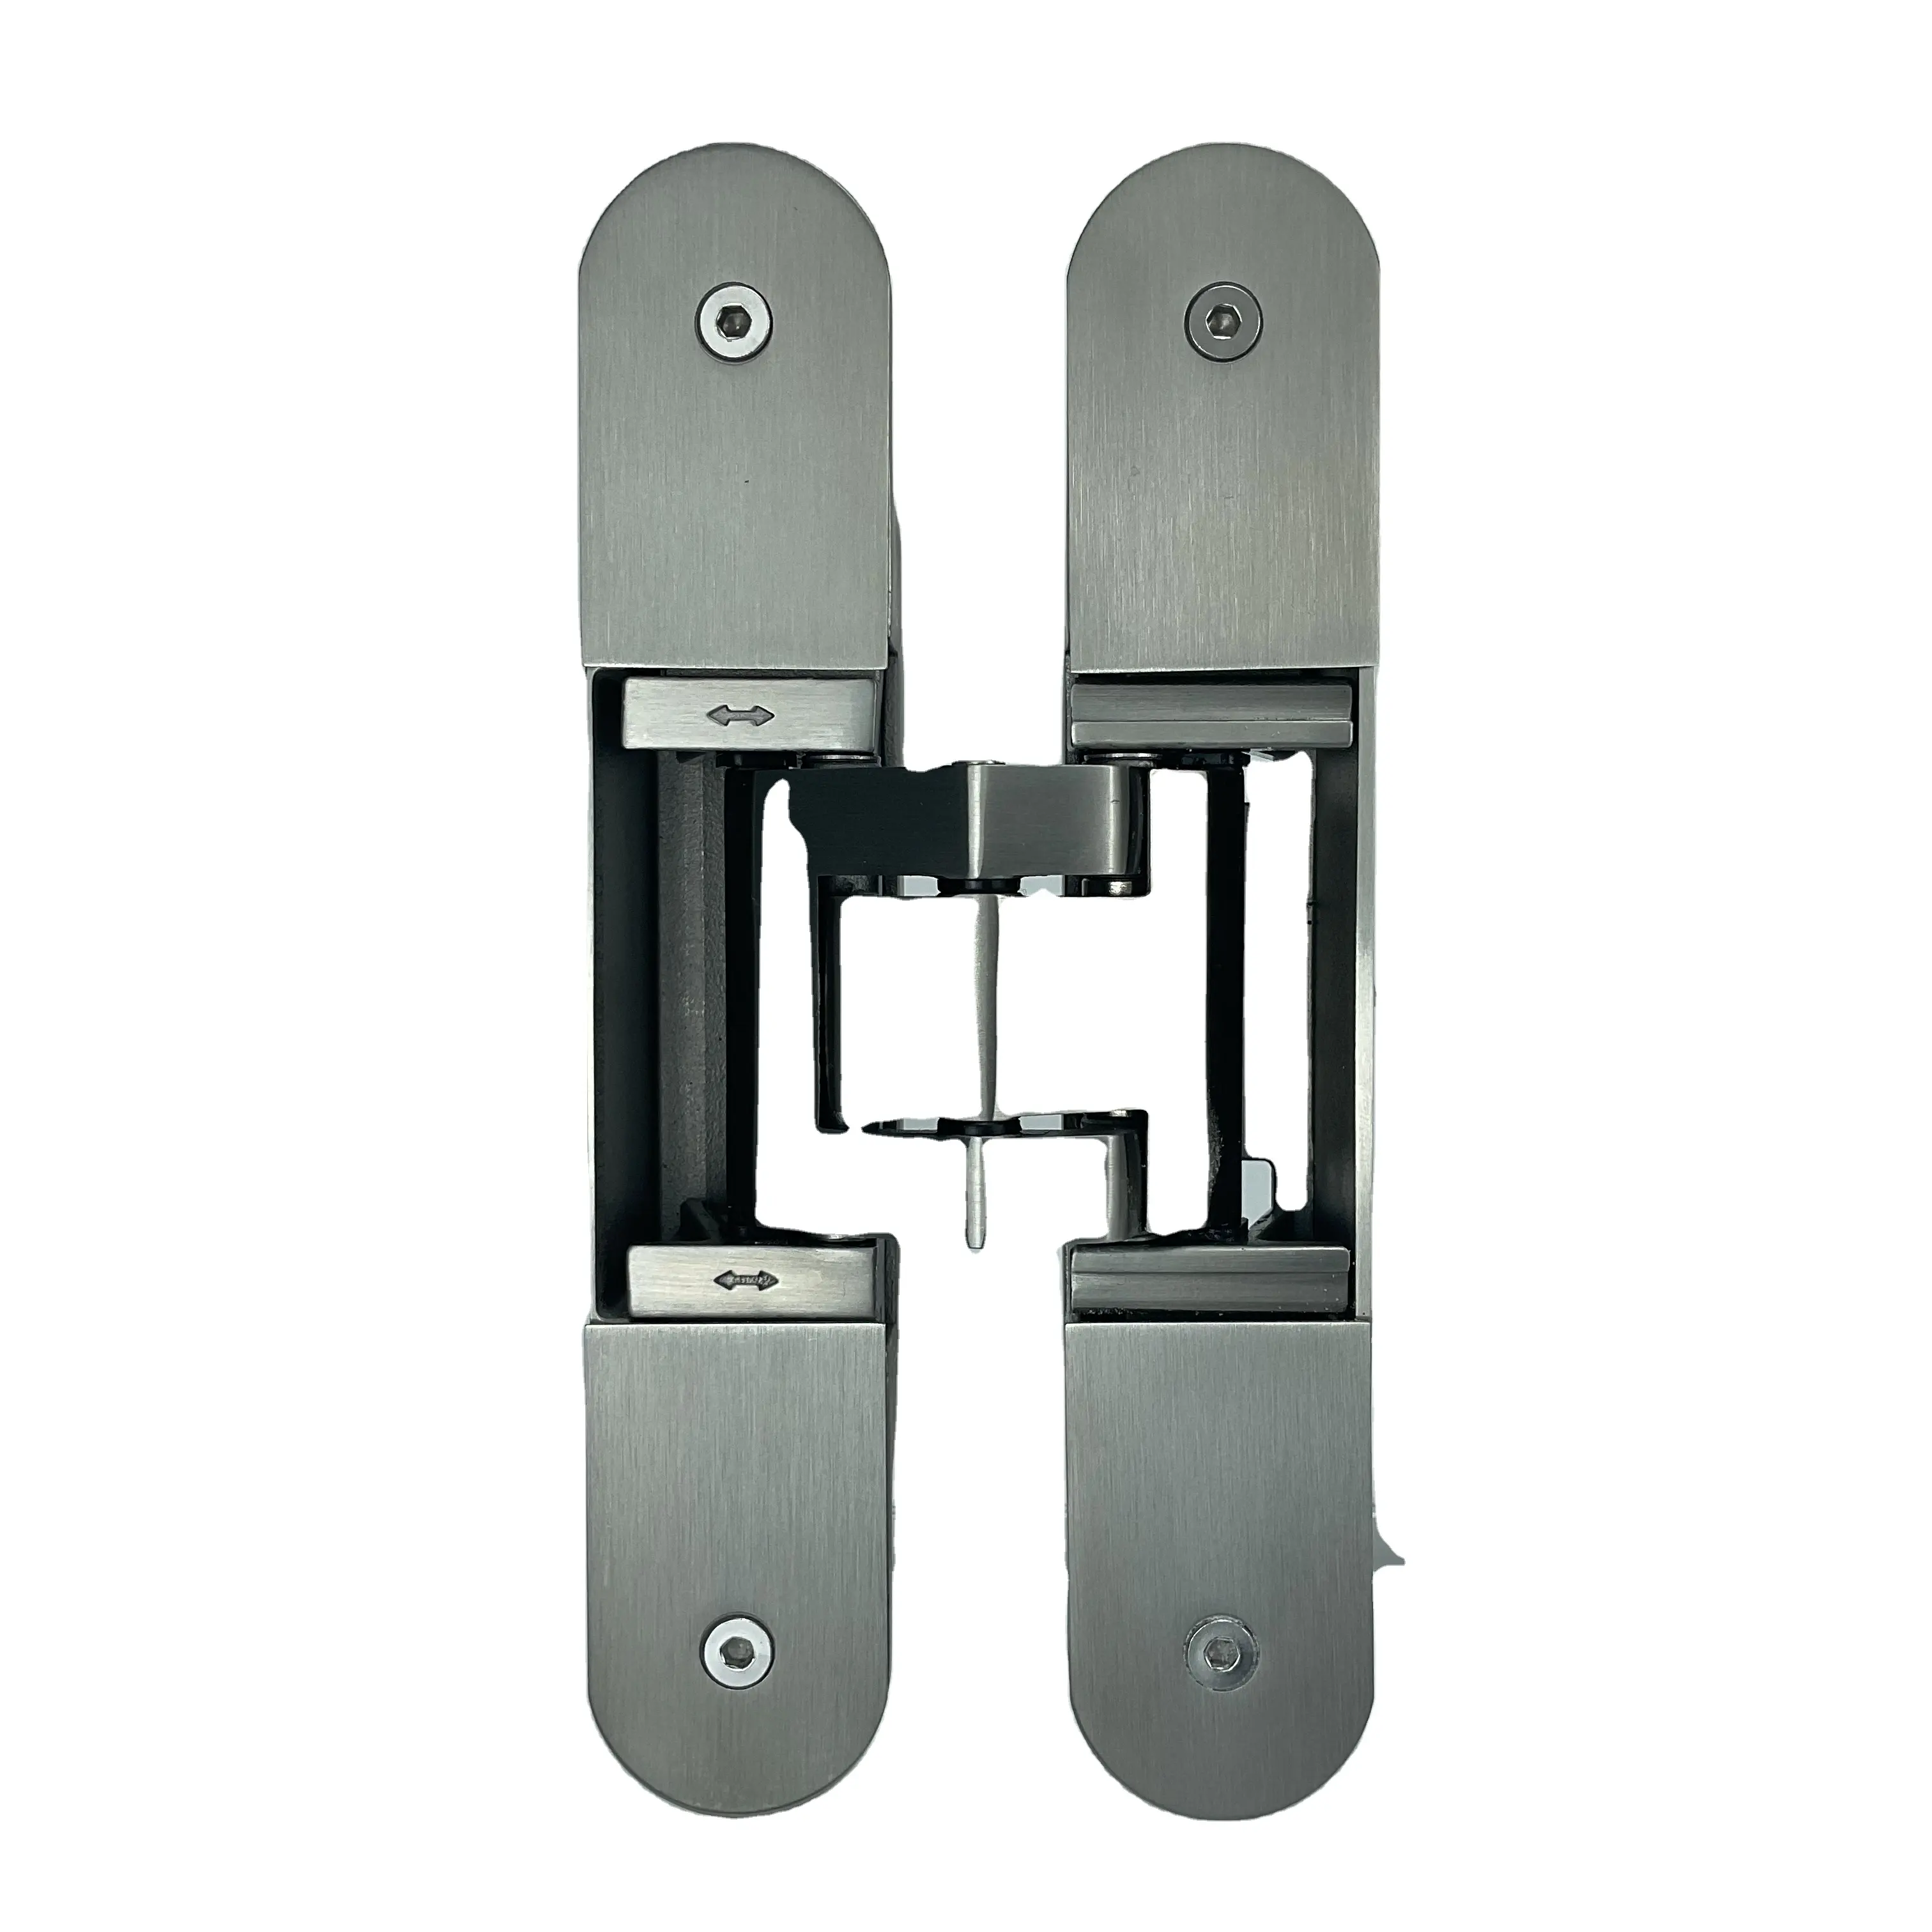 GD100 tectus 340 template stainless steel adjustable gate hinges snap closing semi concealed hinges for 1 4 overlay doors